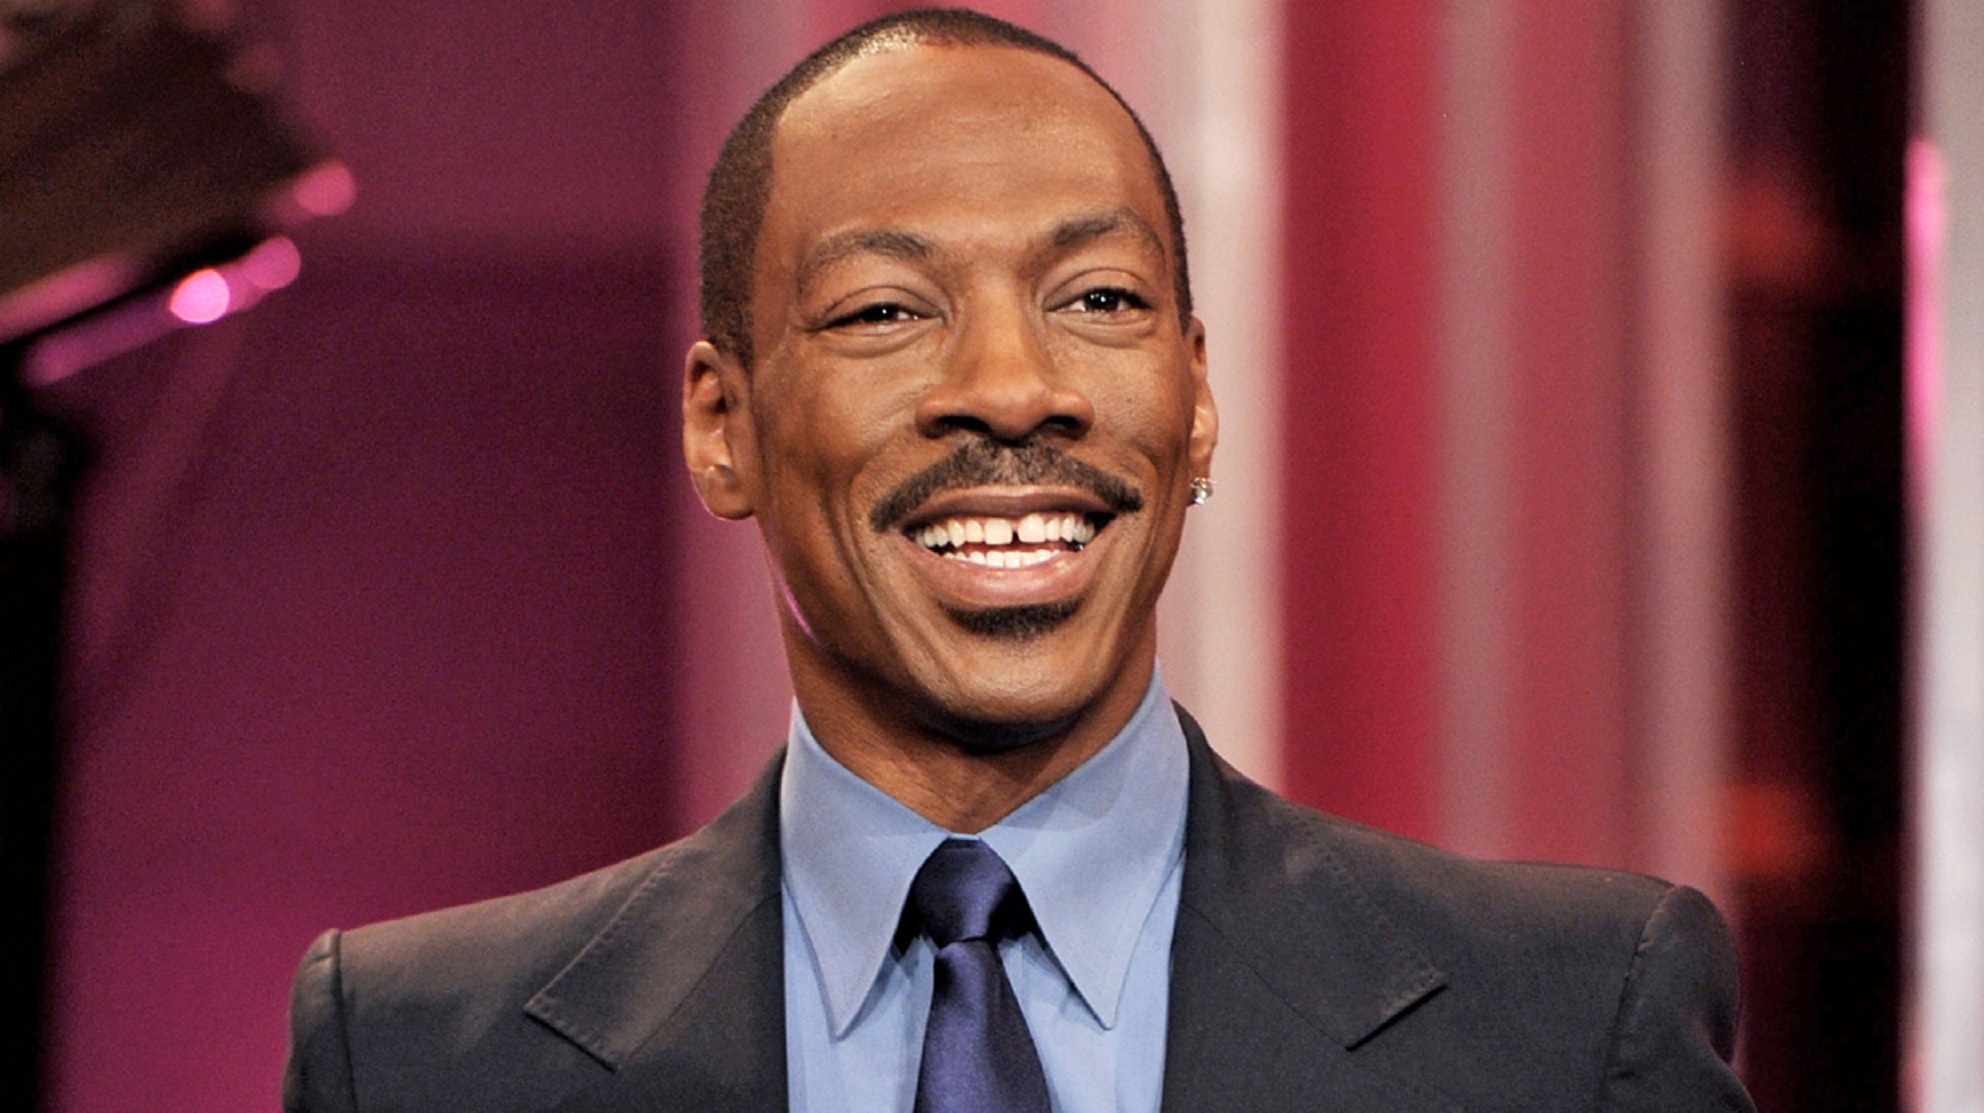 Eddie Murphy In Talks for a $70 Million Stand-Up Comedy Deal with Netflix